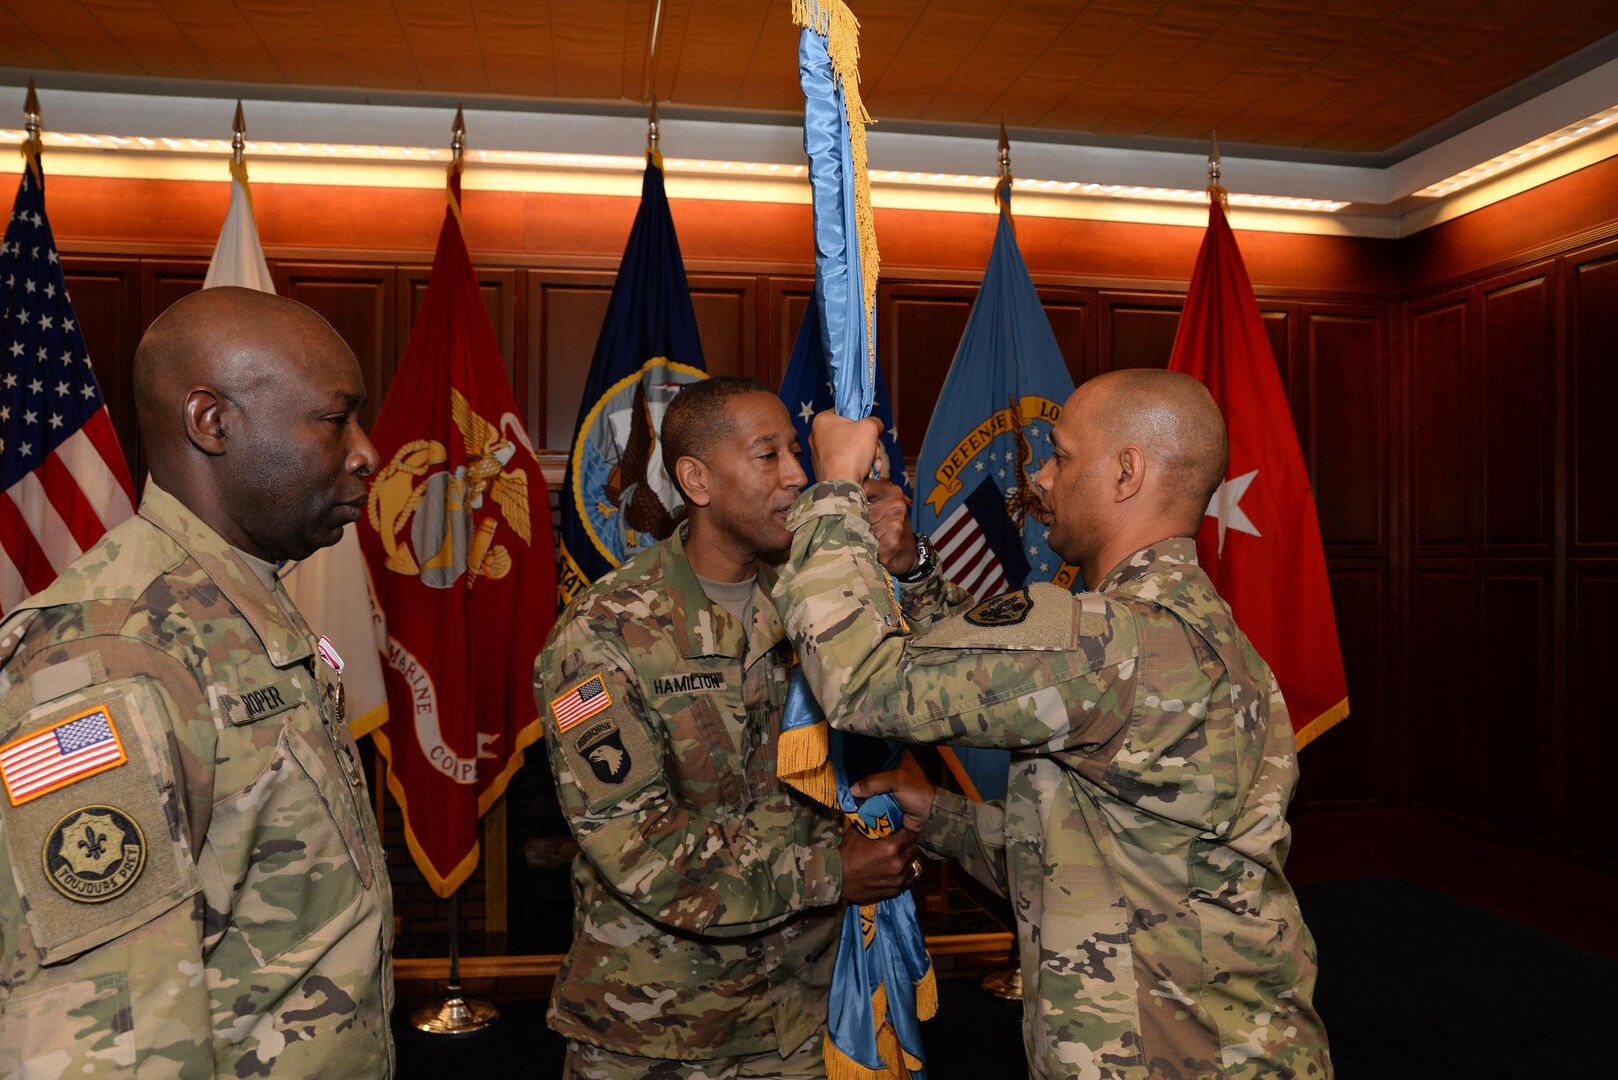 Army Brig. Gen. Charles Hamilton, DLA Troop Support Commander, gives the colors to Army Col. Ronnie Davis, giving him command of the DLA’s Army Reserve Element in a change of command ceremony May 15 at the McNamara Headquarters Complex, Fort Belvoir, Virginia.